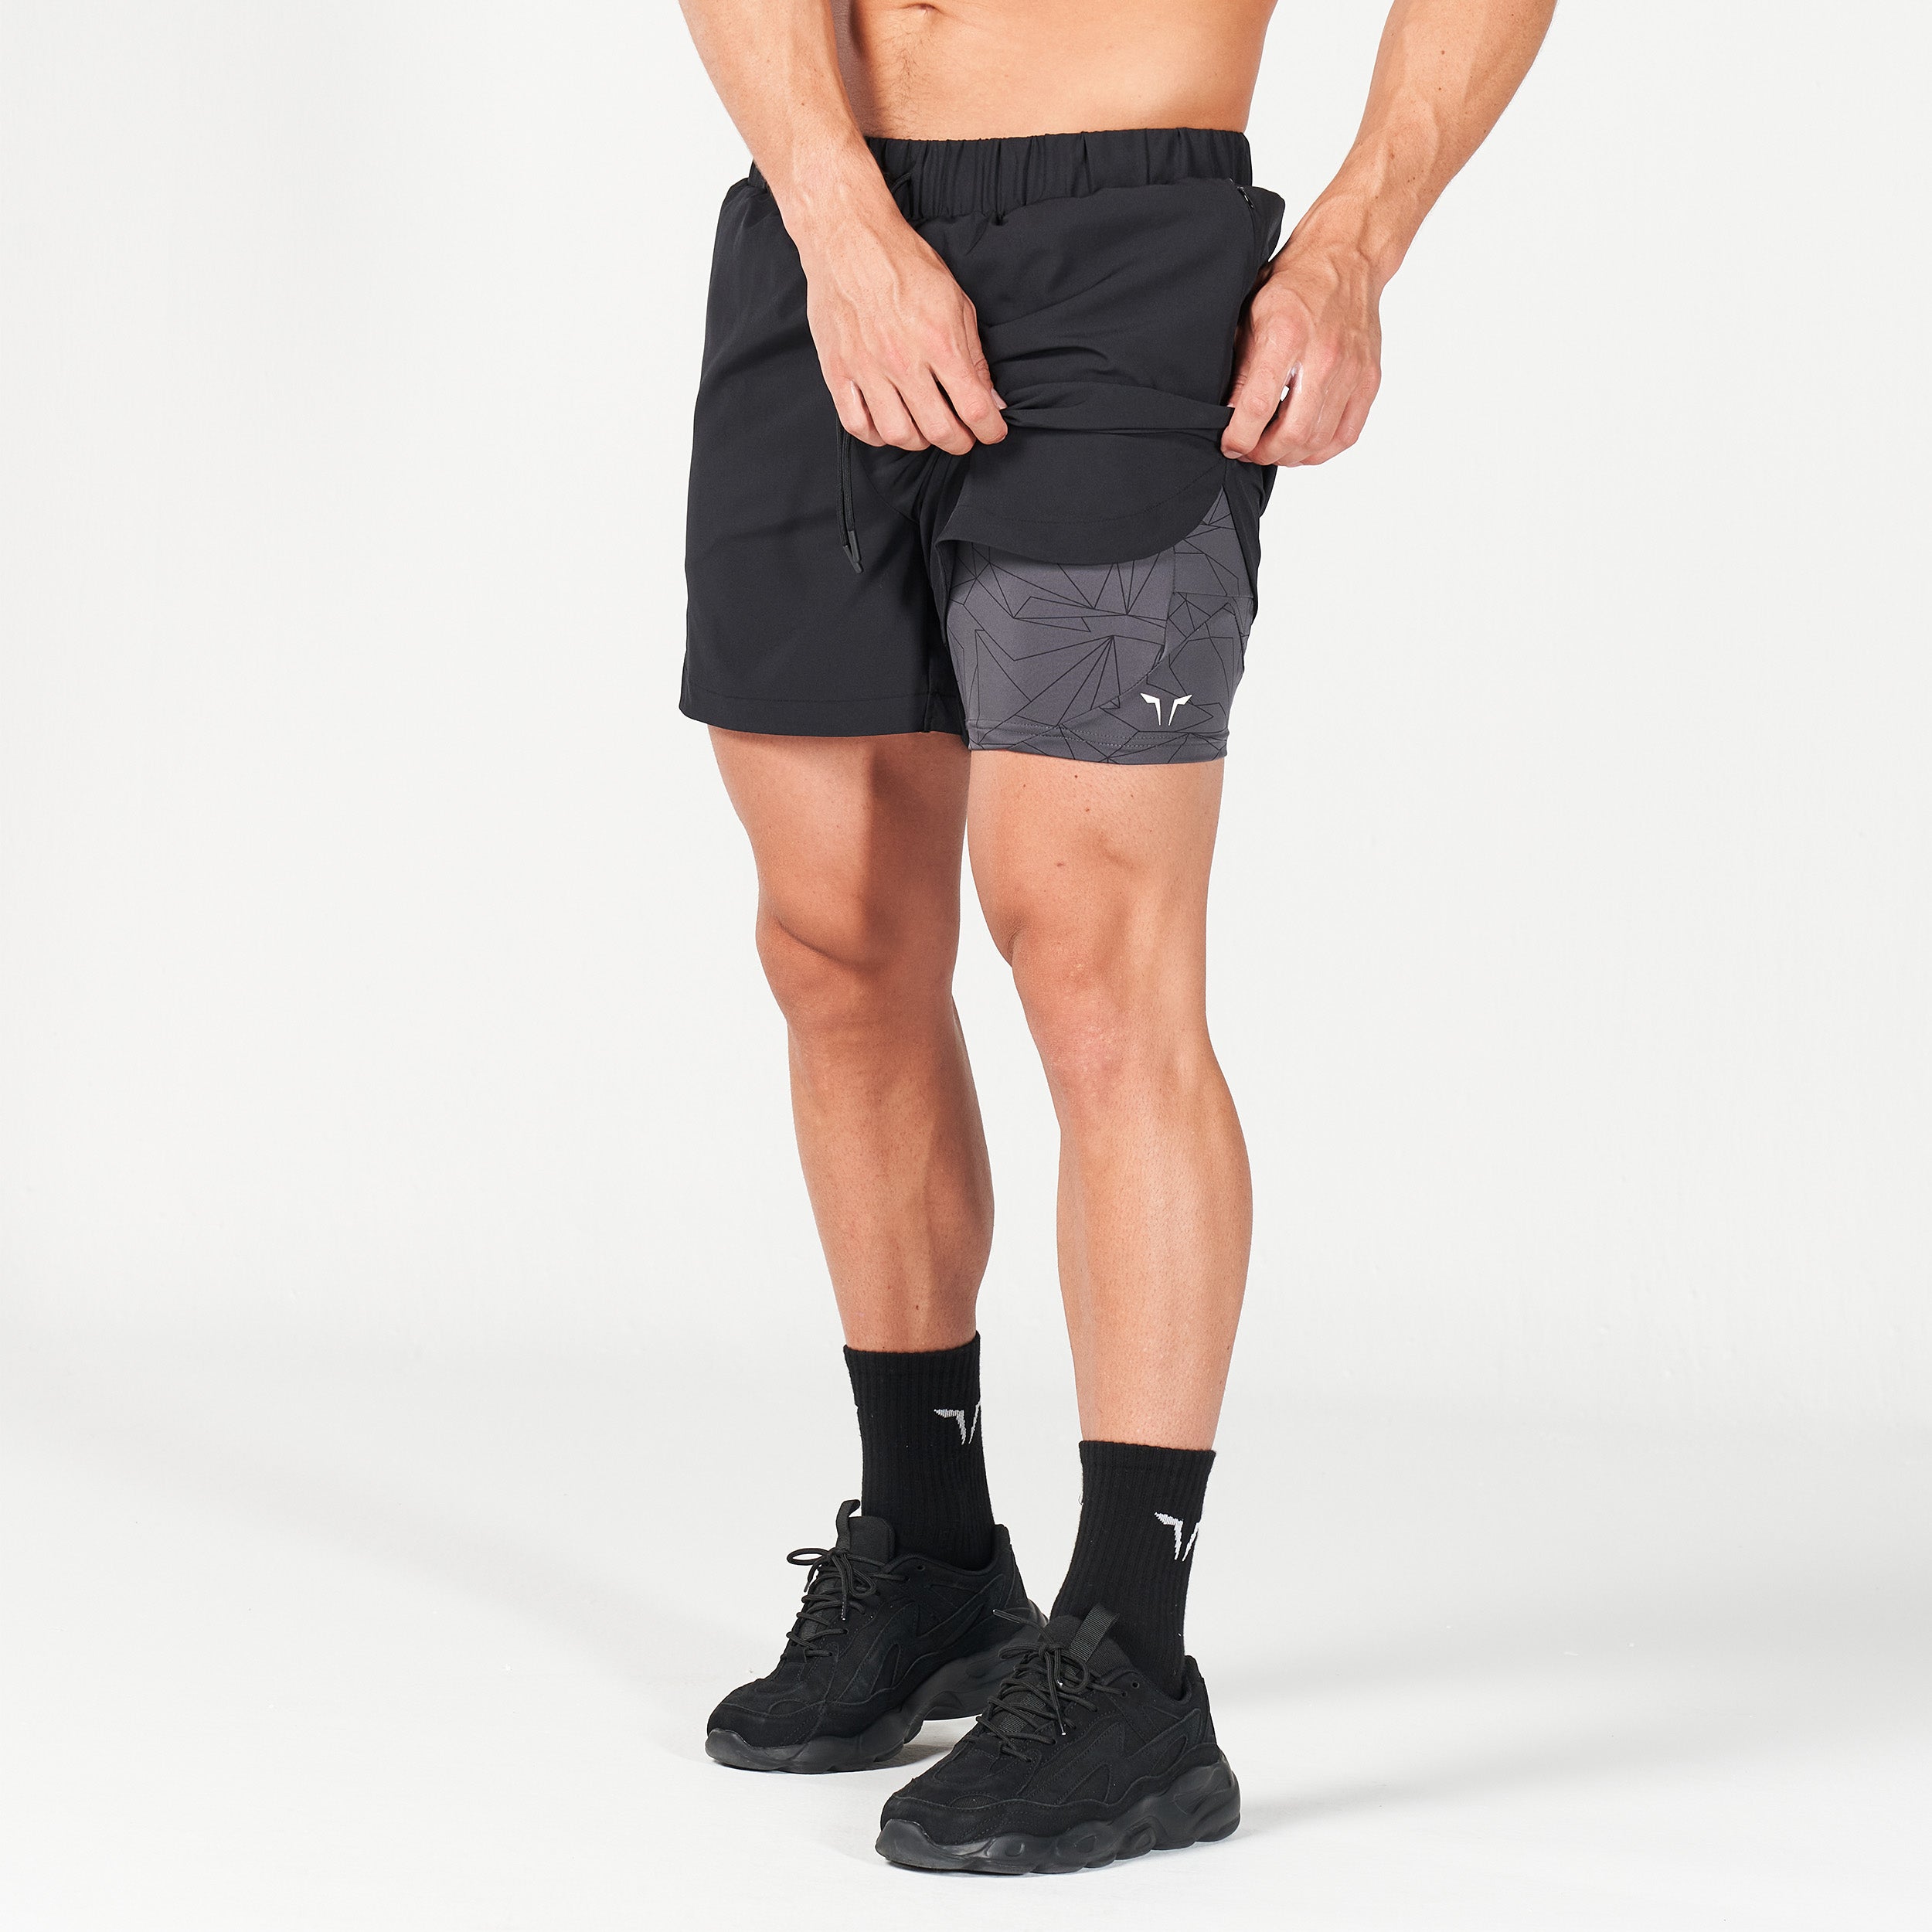 AE | Limitless 2-in-1 5'' Shorts - Black | Gym Shorts Men | SQUATWOLF